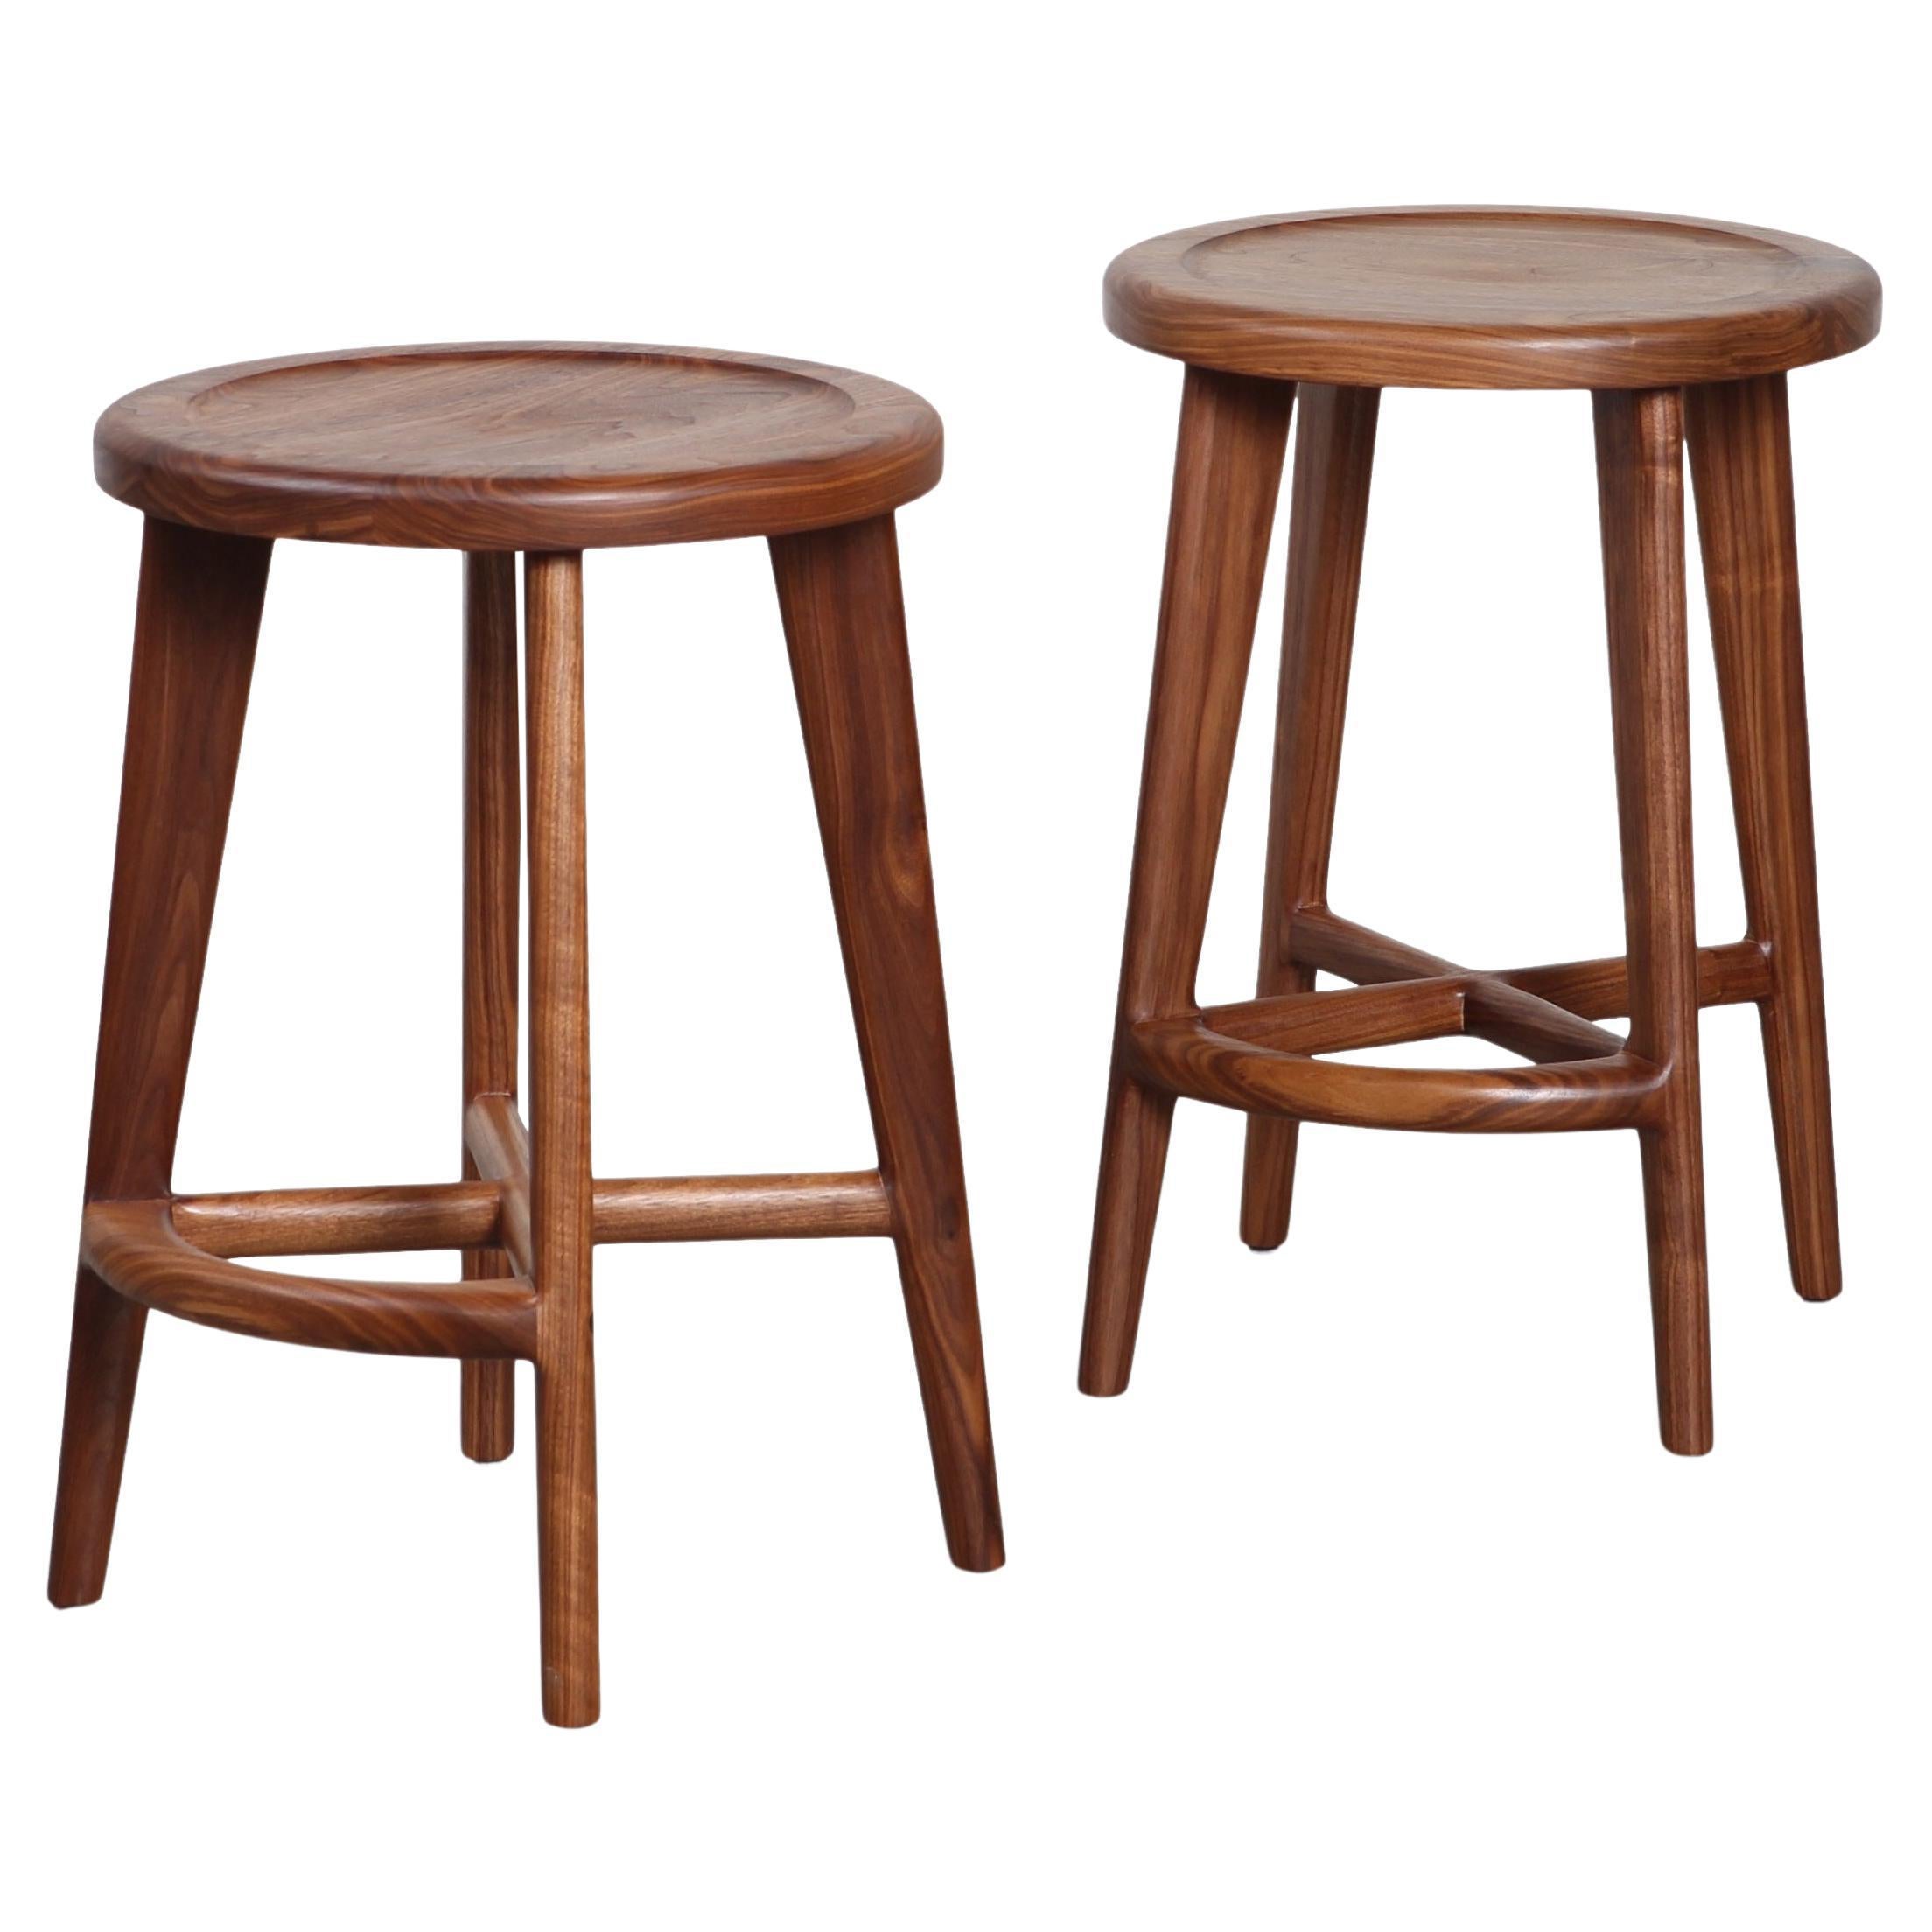 Handcrafted Solid Wood Bar or Counter Stools, Walnut - (Set of 2) Ready to Ship